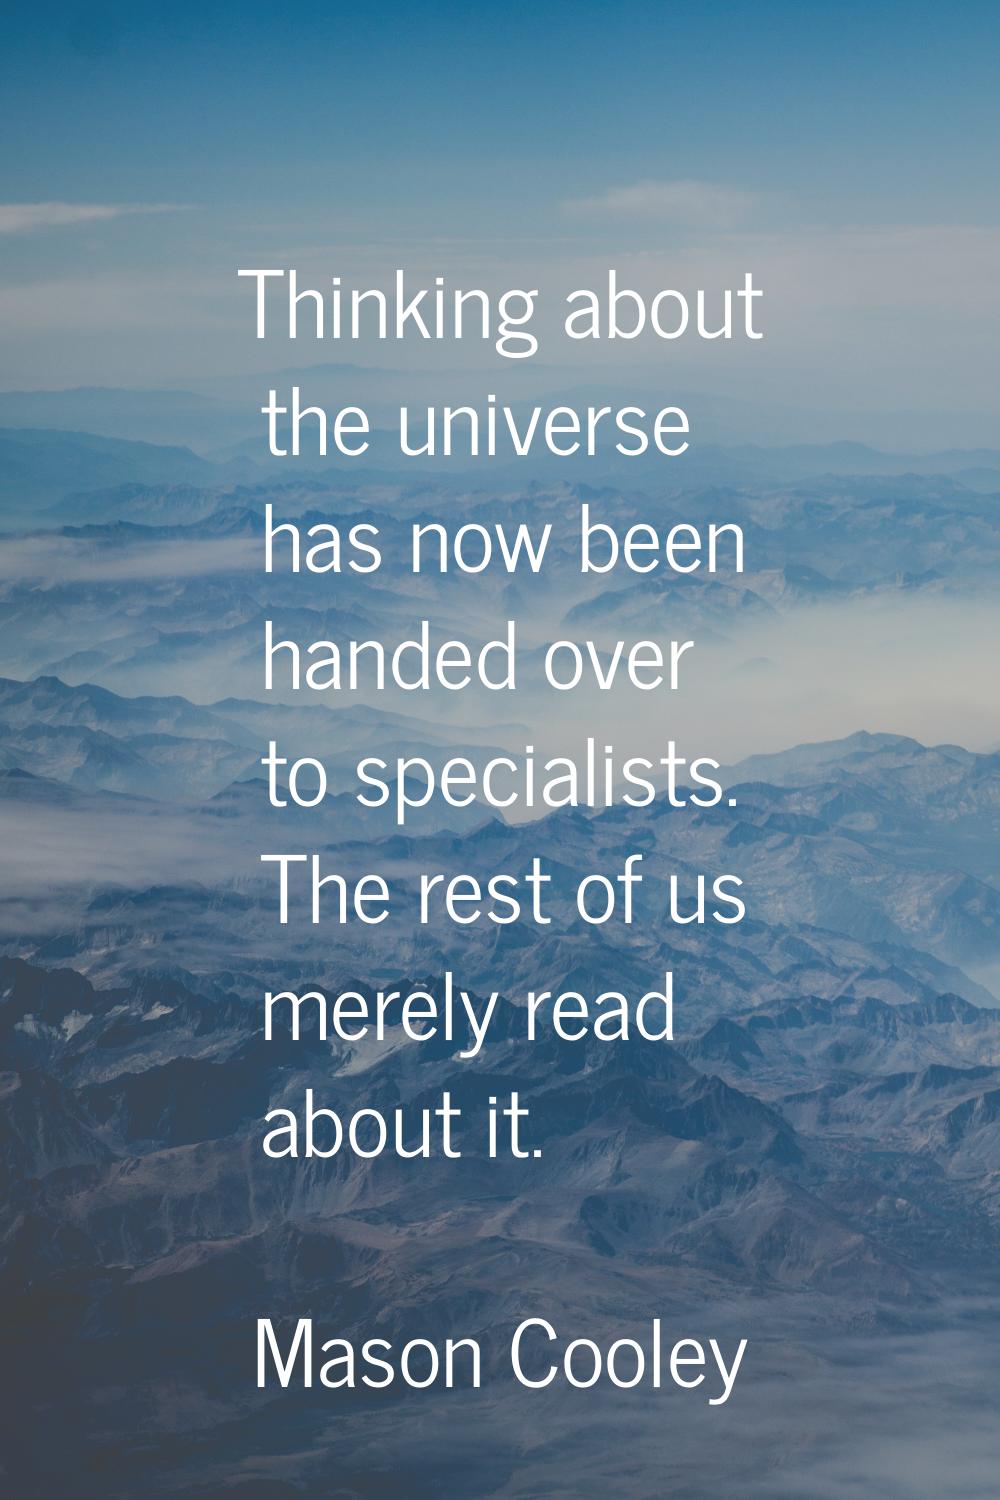 Thinking about the universe has now been handed over to specialists. The rest of us merely read abo